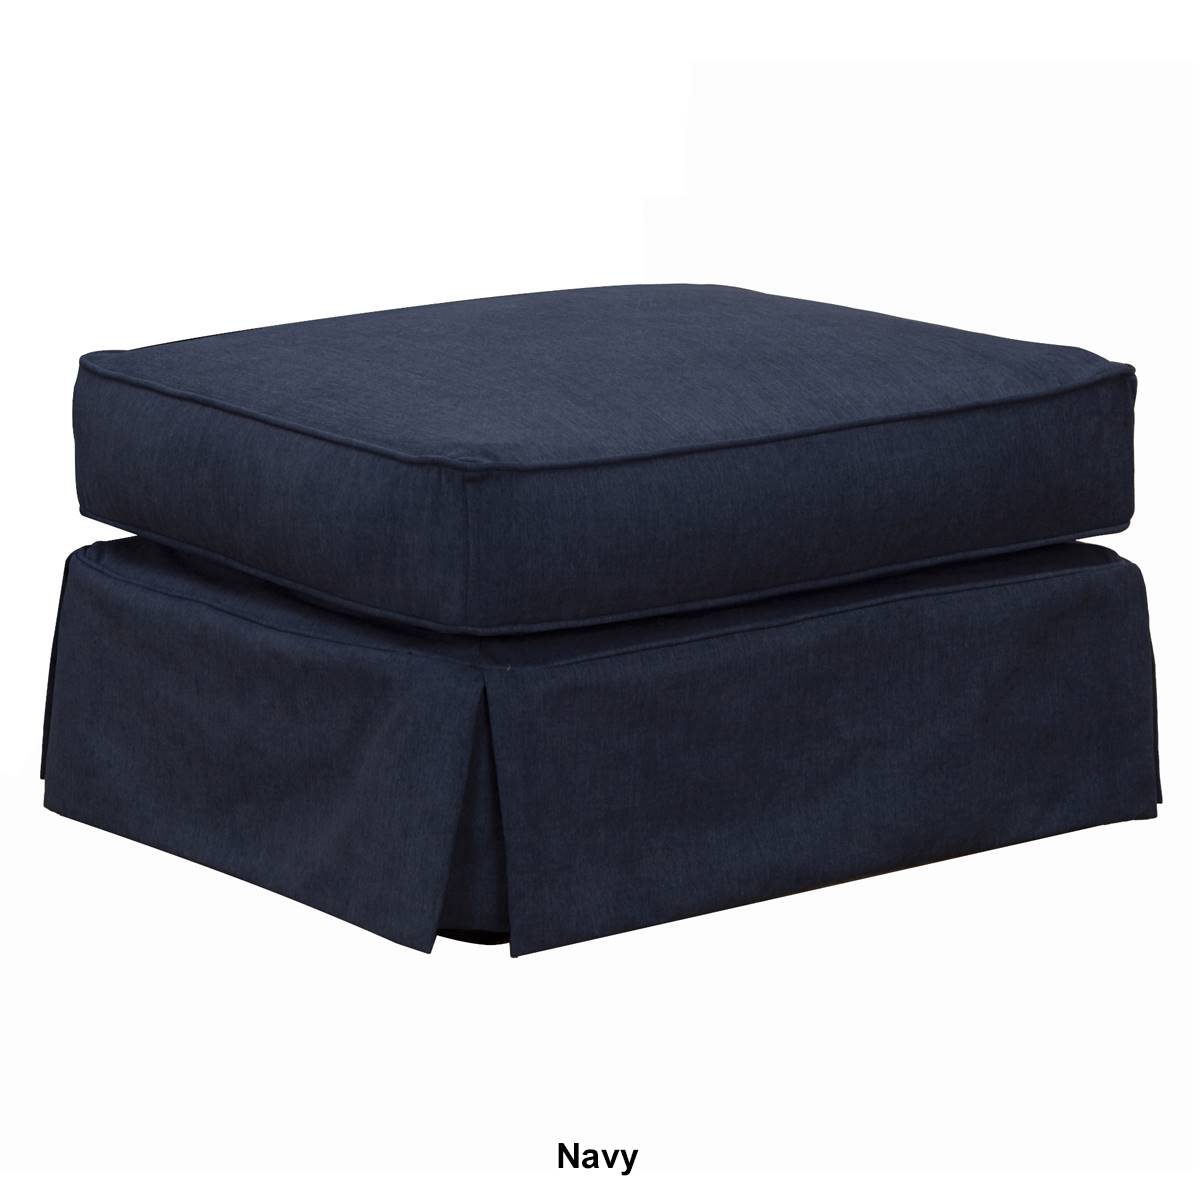 Besthom Americana Upholstered Pillow Top Ottoman